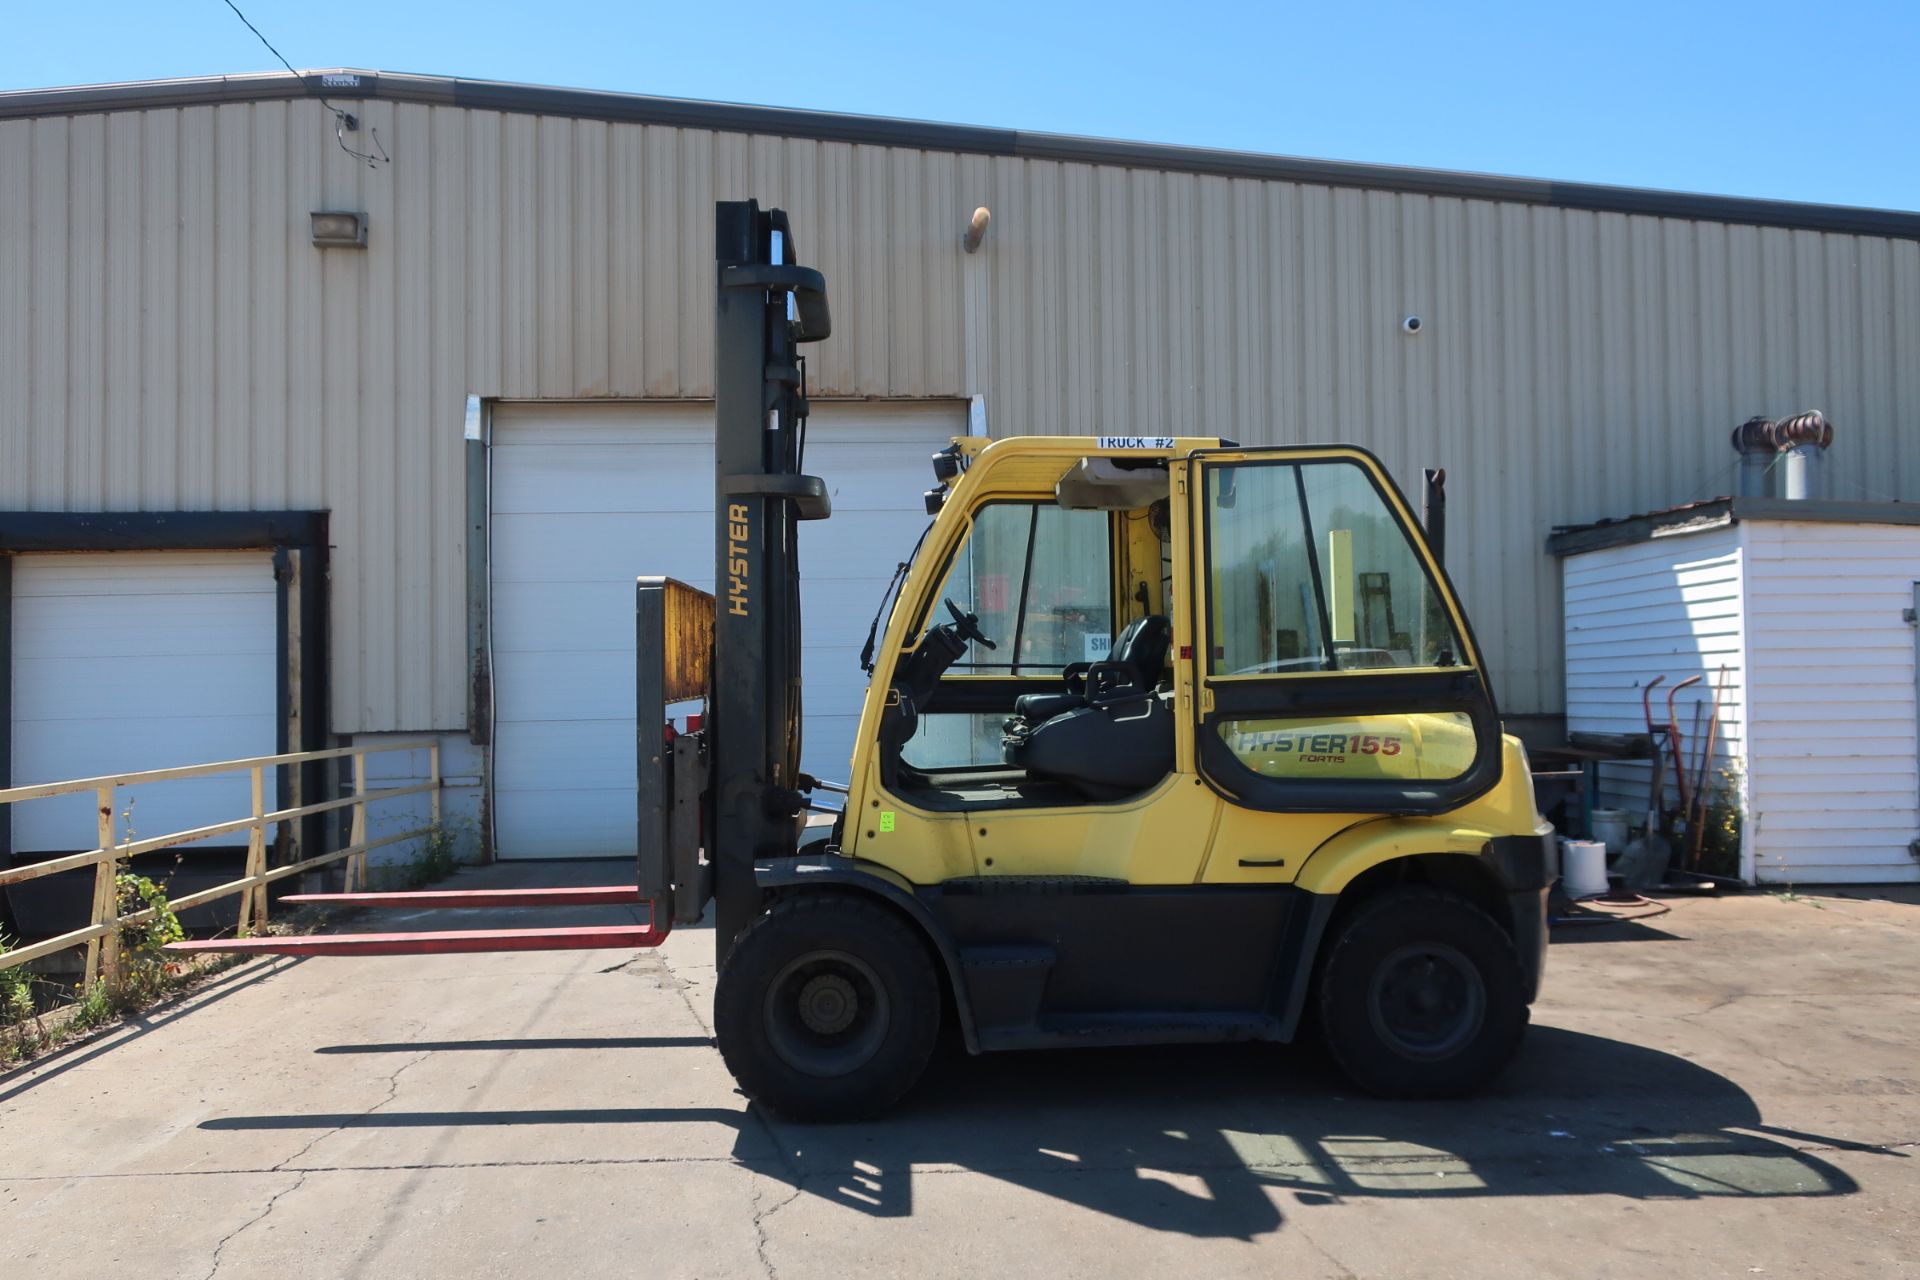 FREE CUSTOMS - MINT 2015 Hyster OUTDOOR 15500lbs Capacity Forklift with 72" - LPG (propane) with - Image 5 of 5